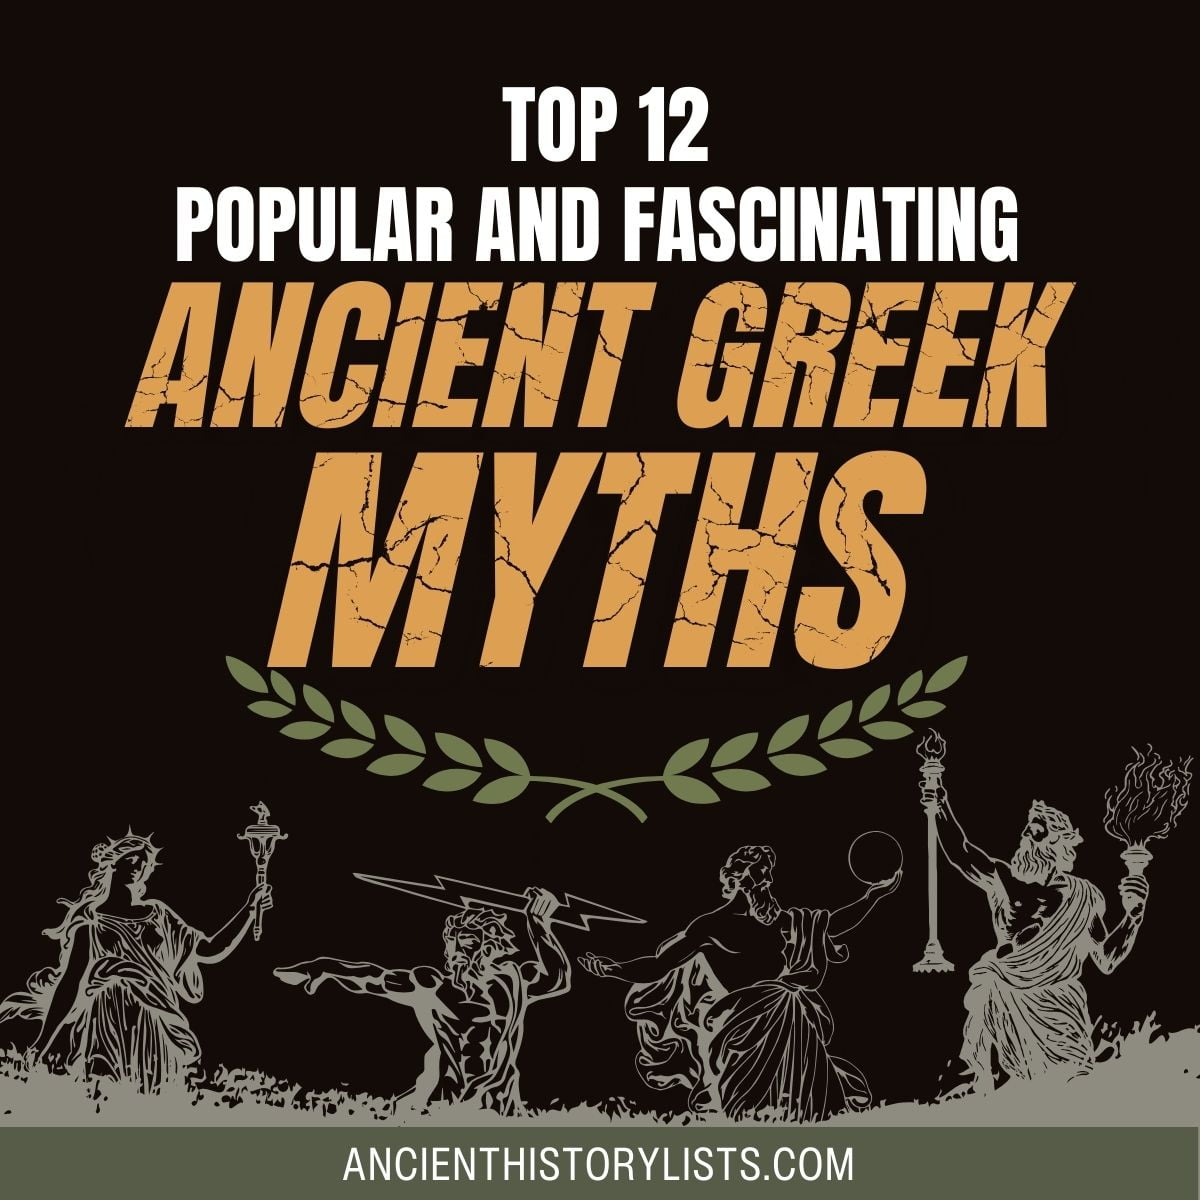 Fascinating Ancient Greece Myths